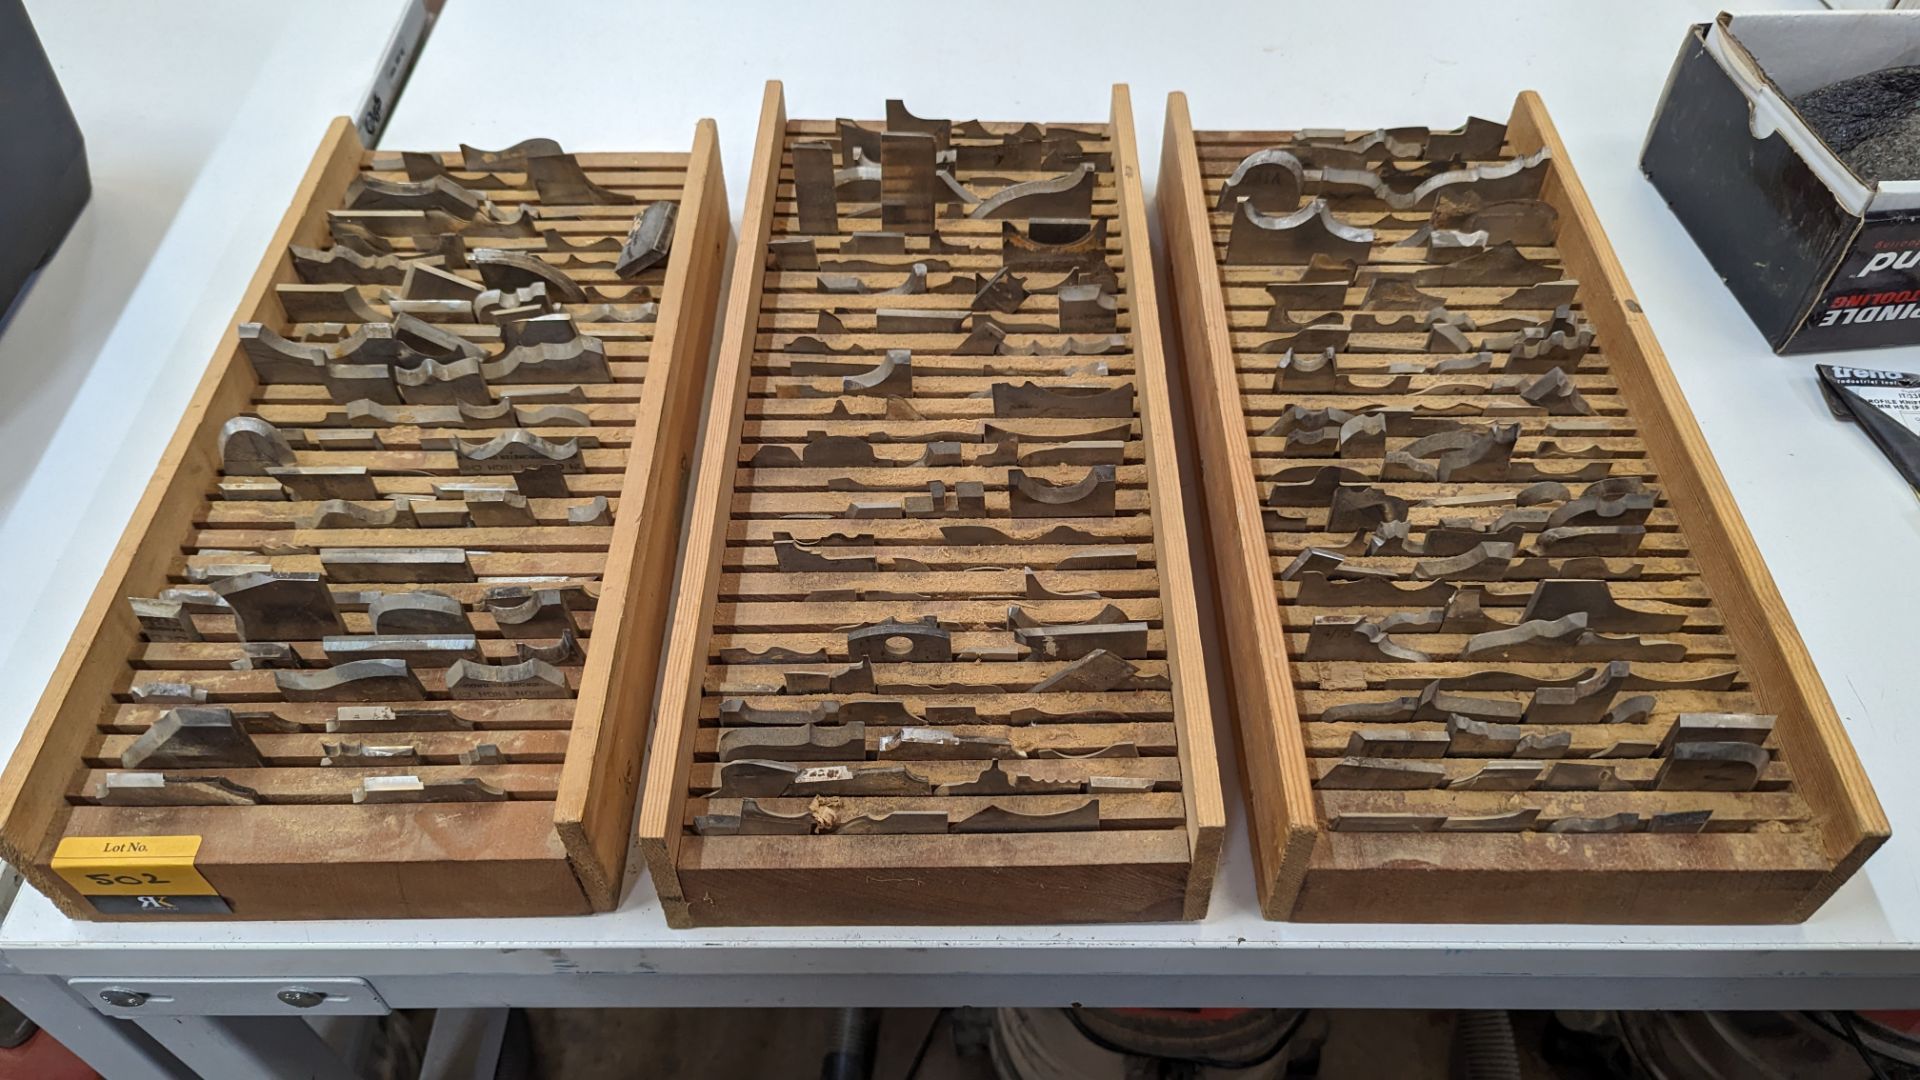 Large quantity of tooling, primarily for spindle moulders - this lot comprises 3 wooden trays & thei - Image 2 of 11